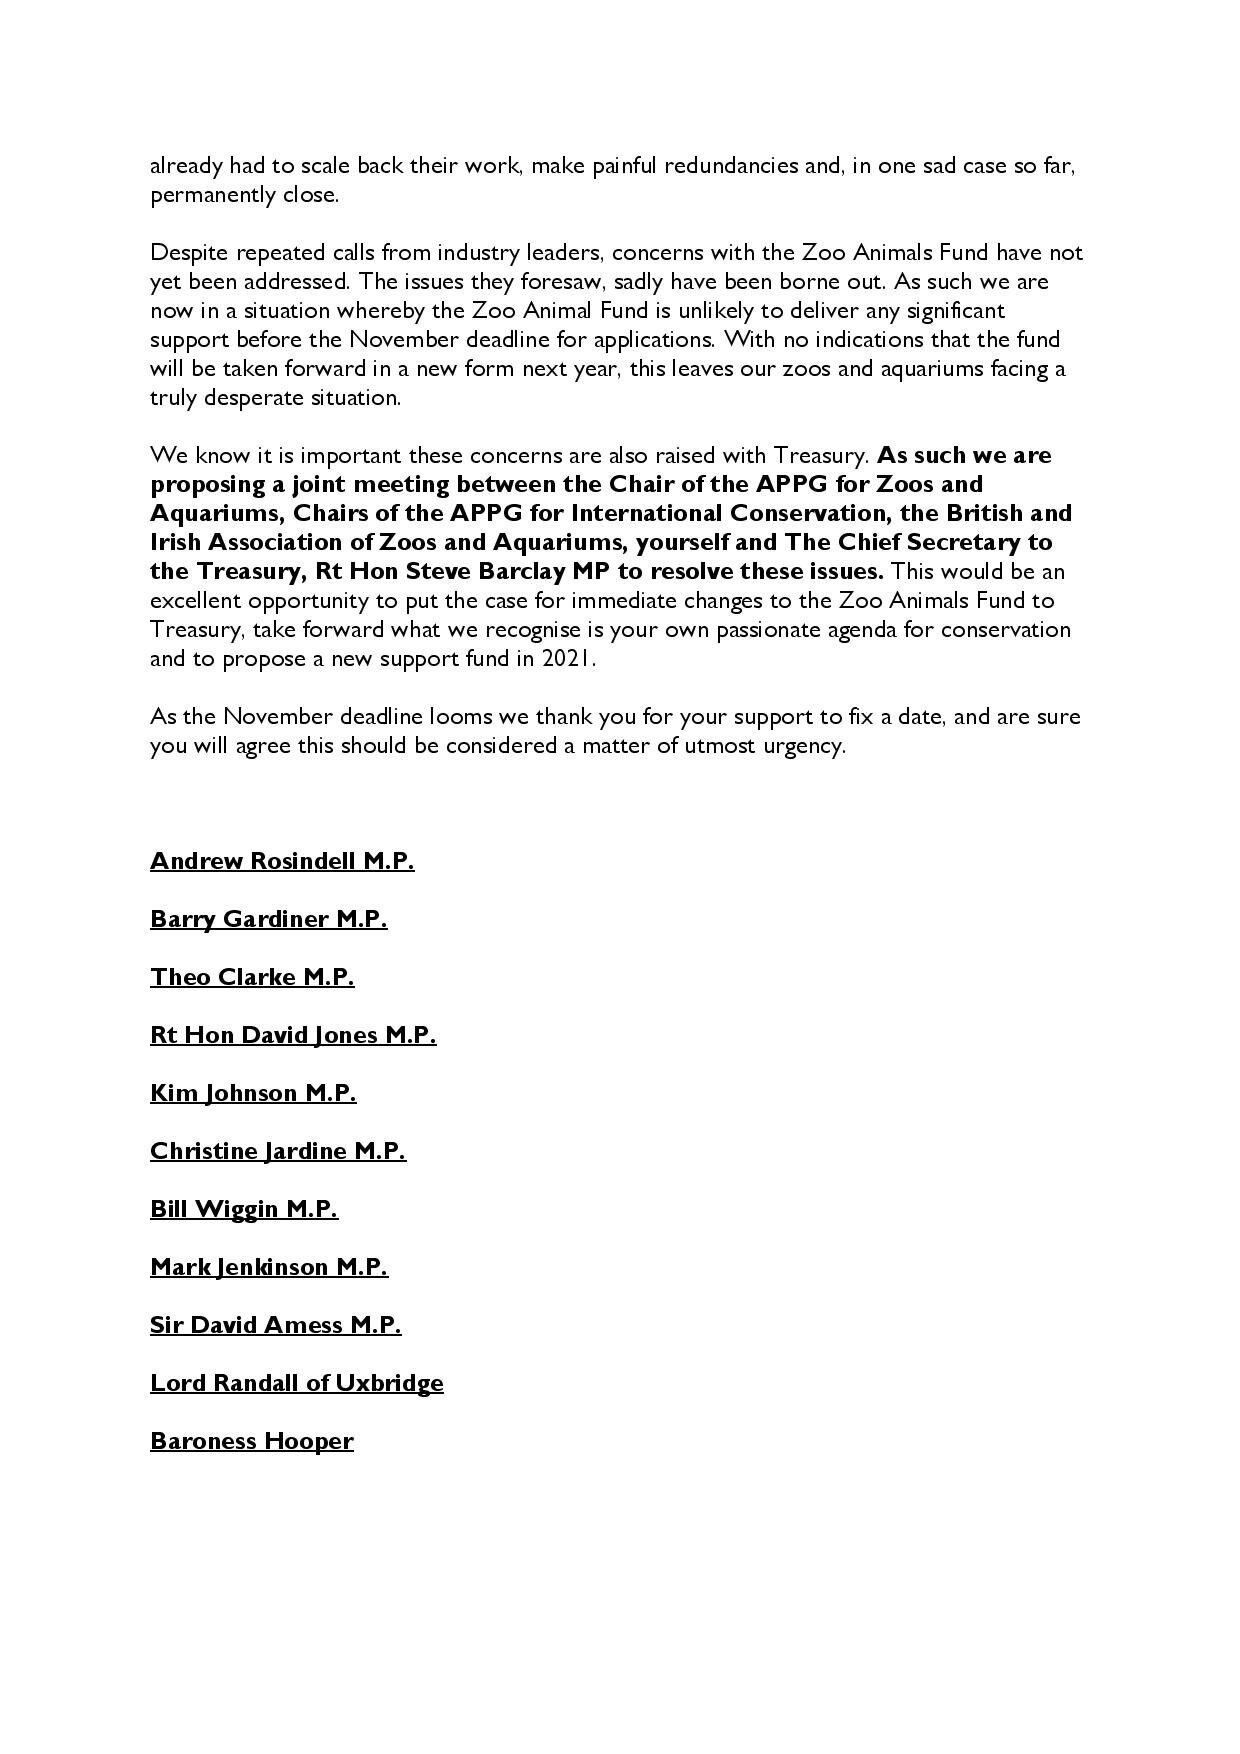 201007 Joint APPG letter_Zoos Aquariums_International Conservation FINAL APPROVED-page-002.jpg